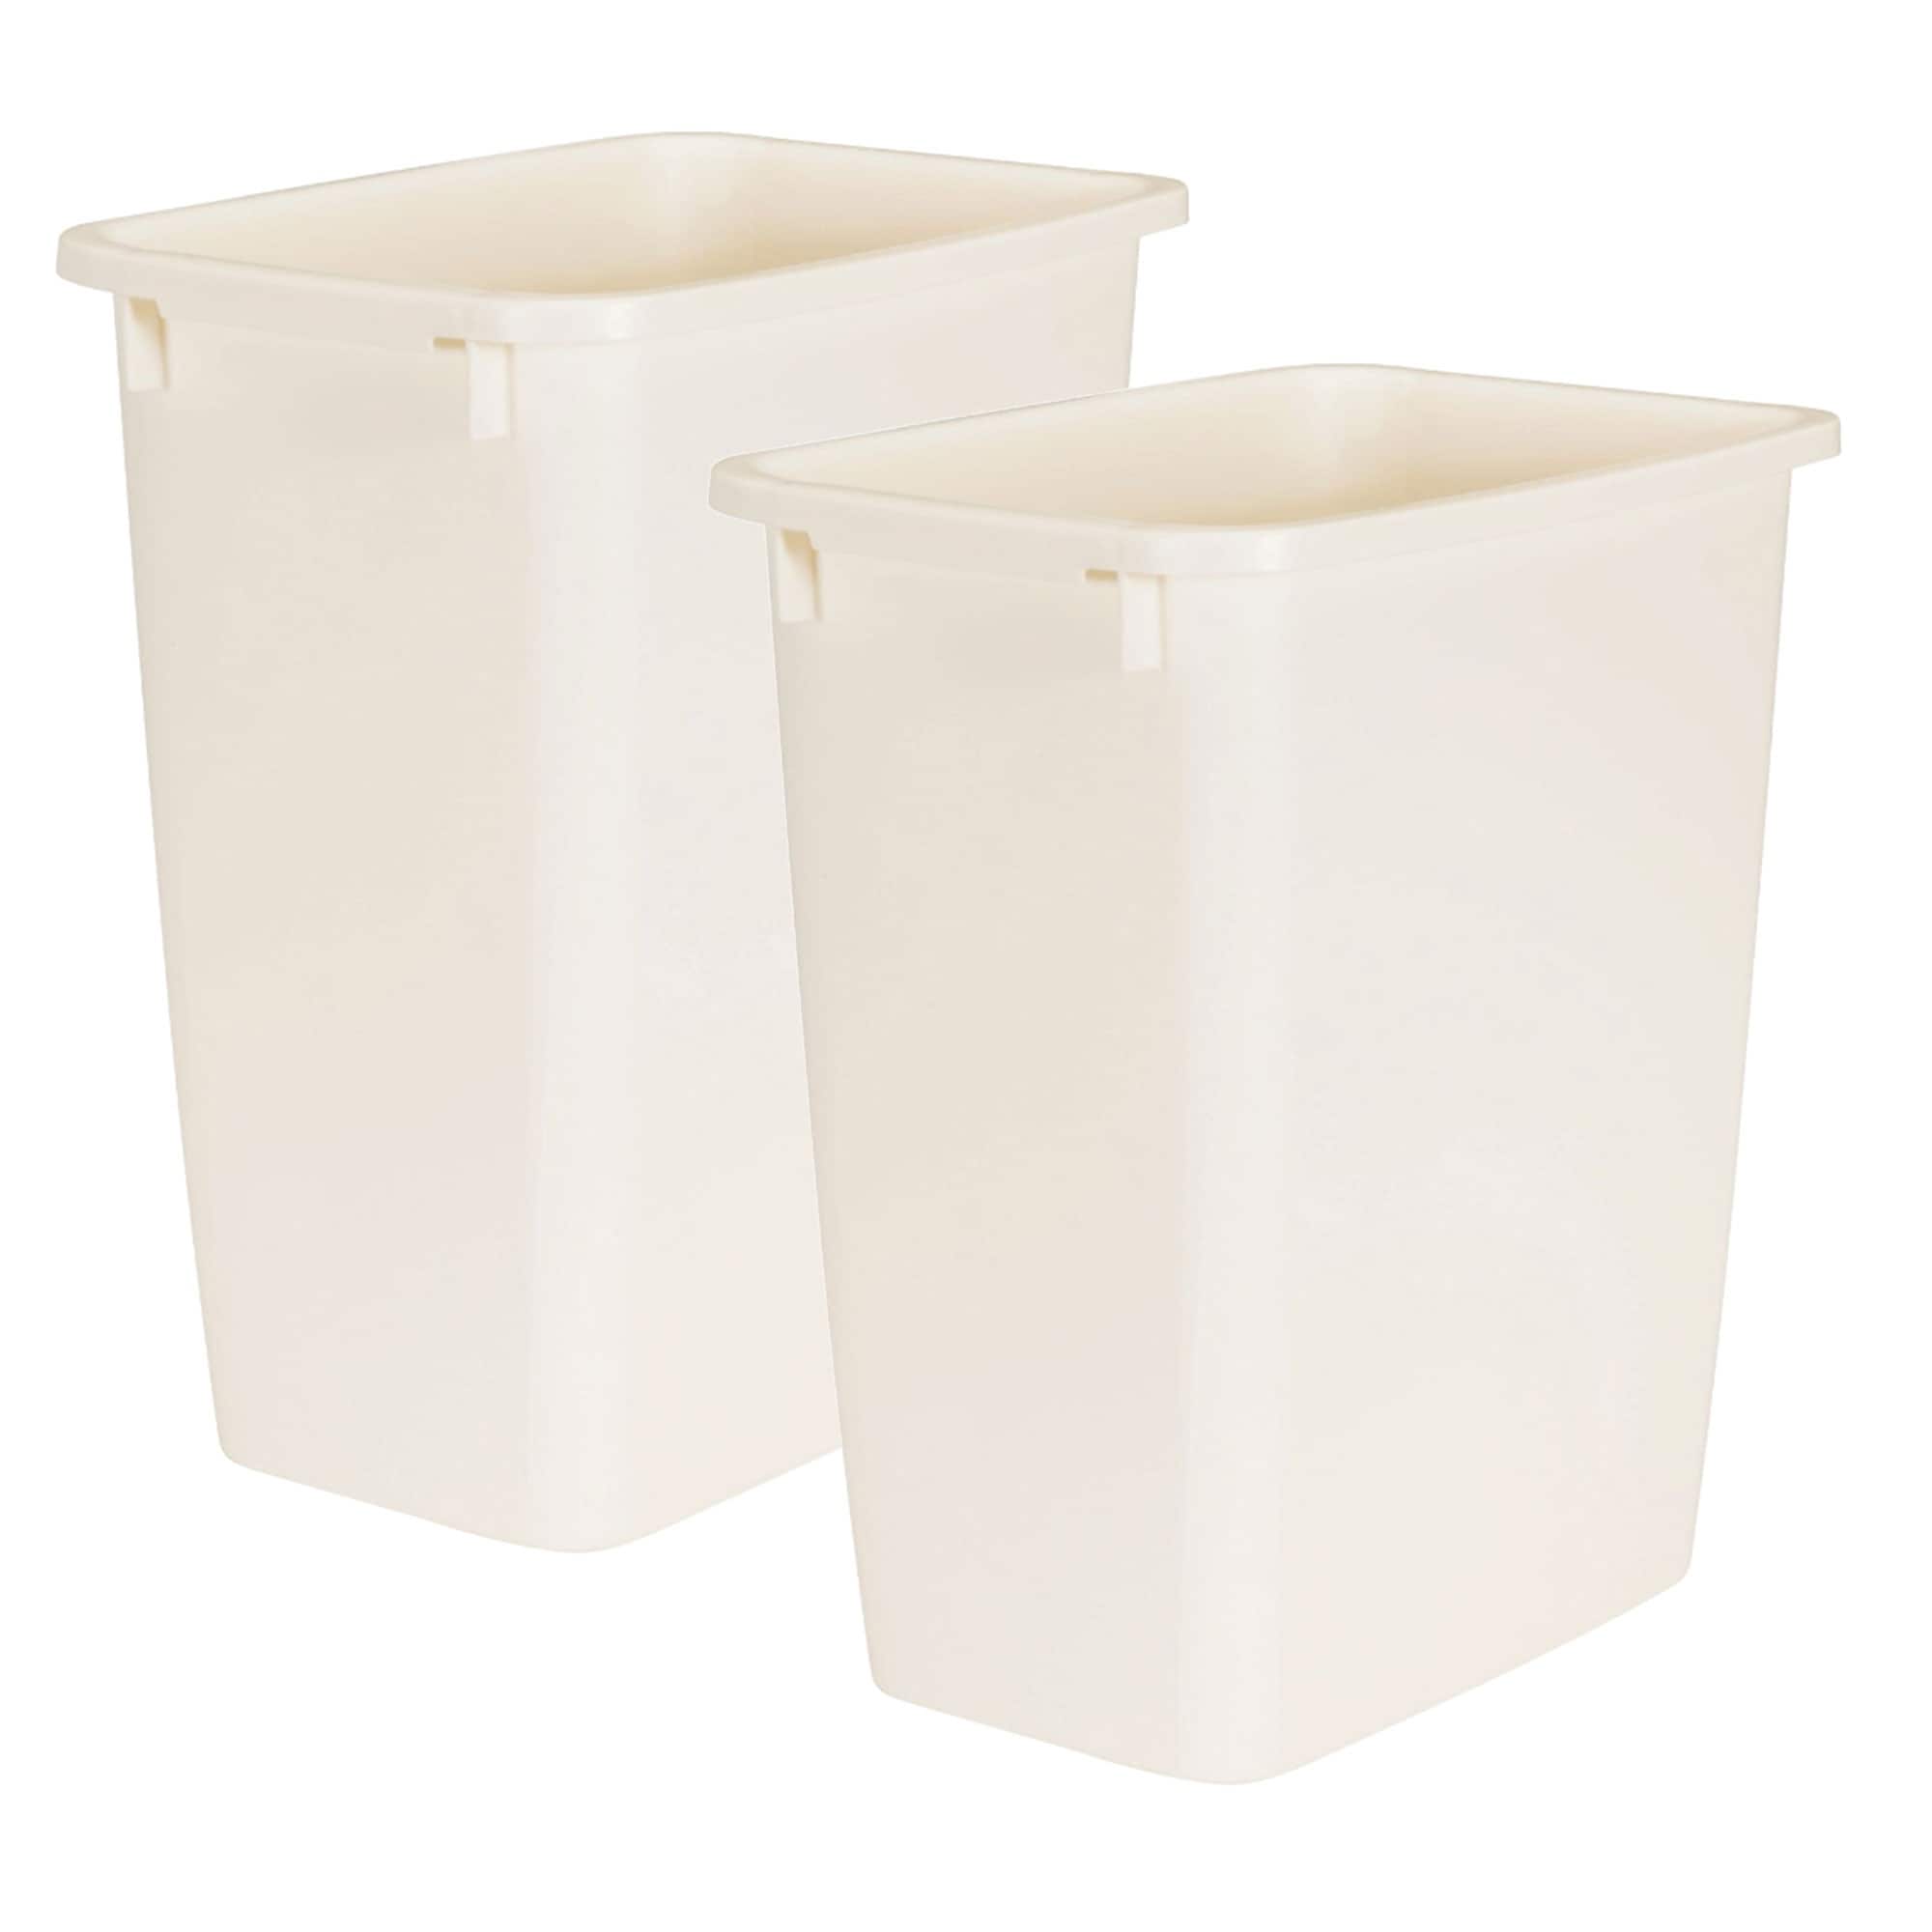 Rubbermaid Bedroom, Bathroom, and Office Wastebasket Trash Can, 6 Quart, 3 Pack, Size: 1.5 Gallons, White